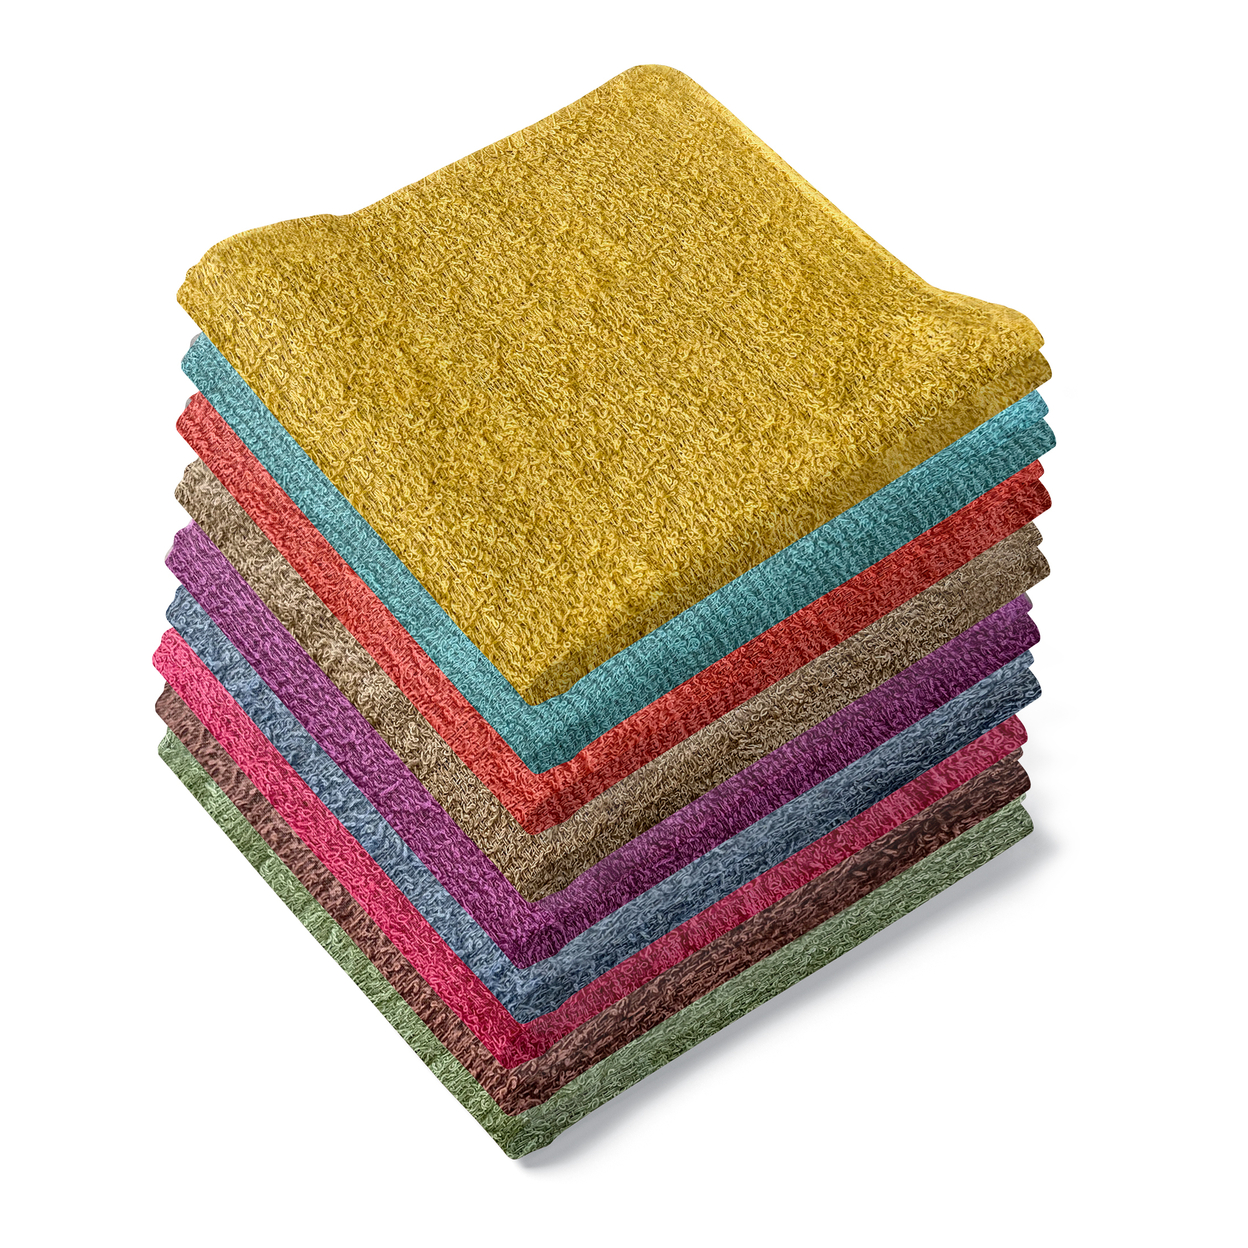 6-Pack: 100% Ultra-Soft Absorbent Cotton Multipurpose Cleaning Wash Cloths